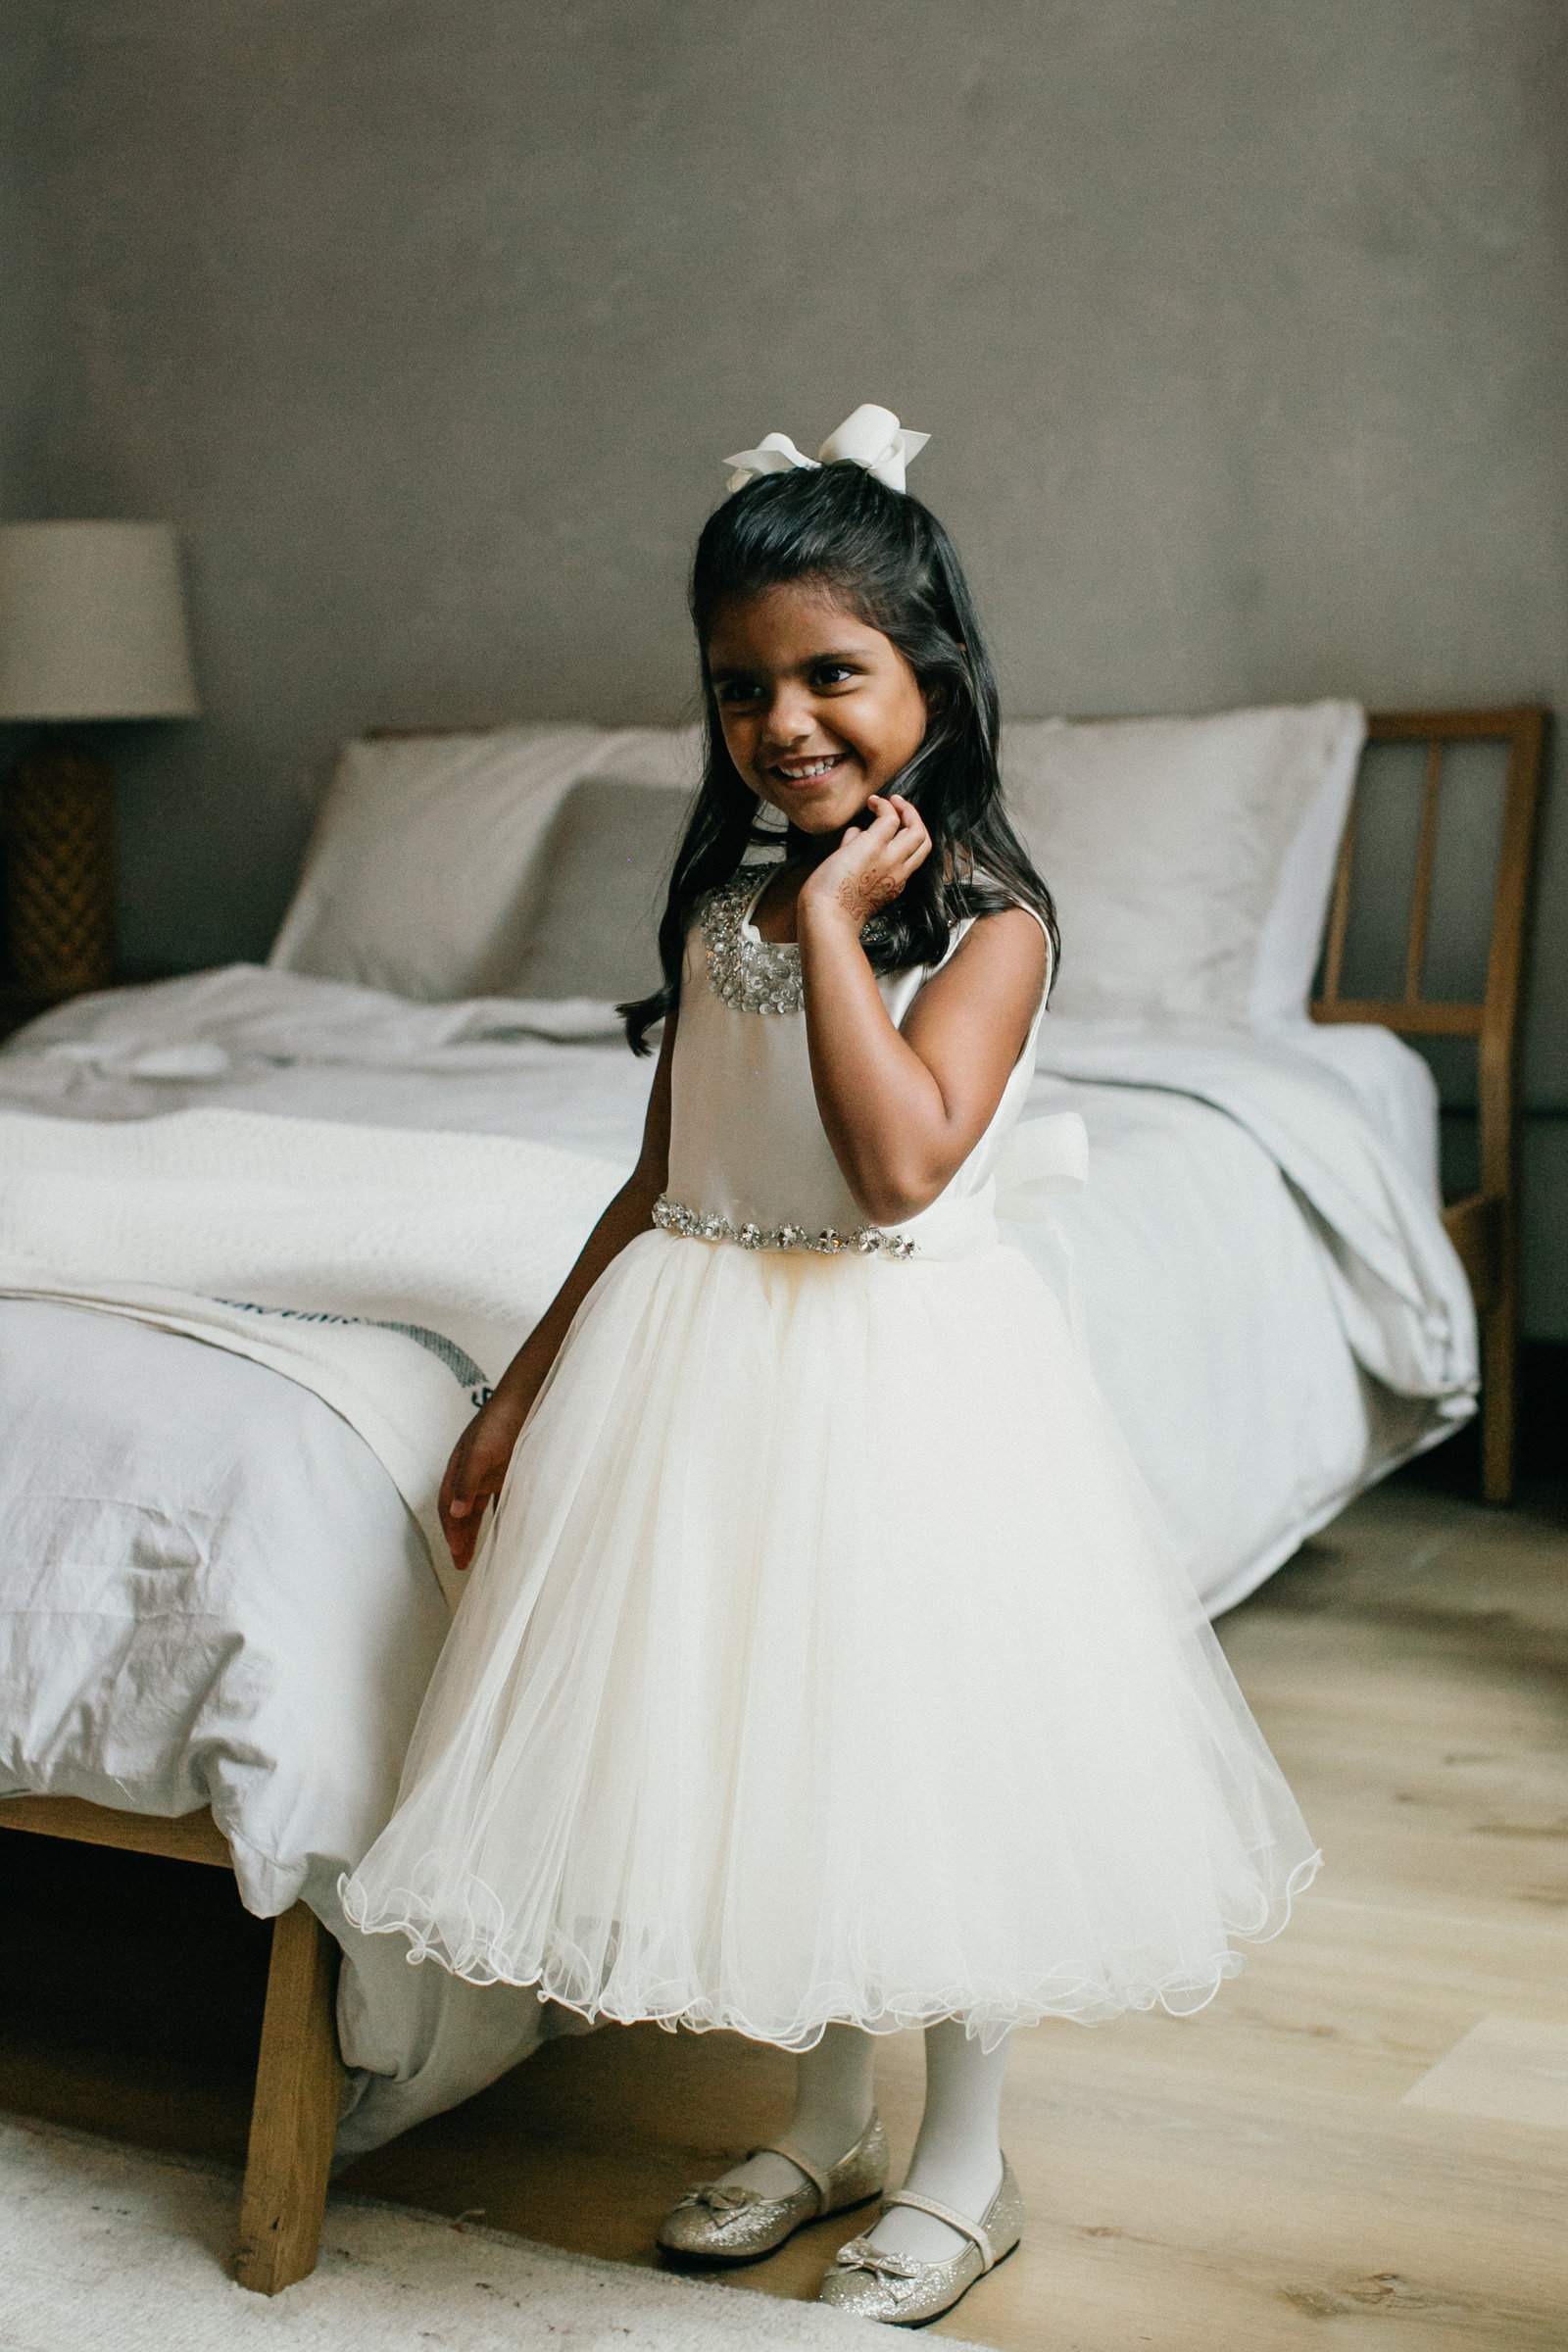 Gorgeous flower girl photographed in Lokal Hotel suite in Old City.